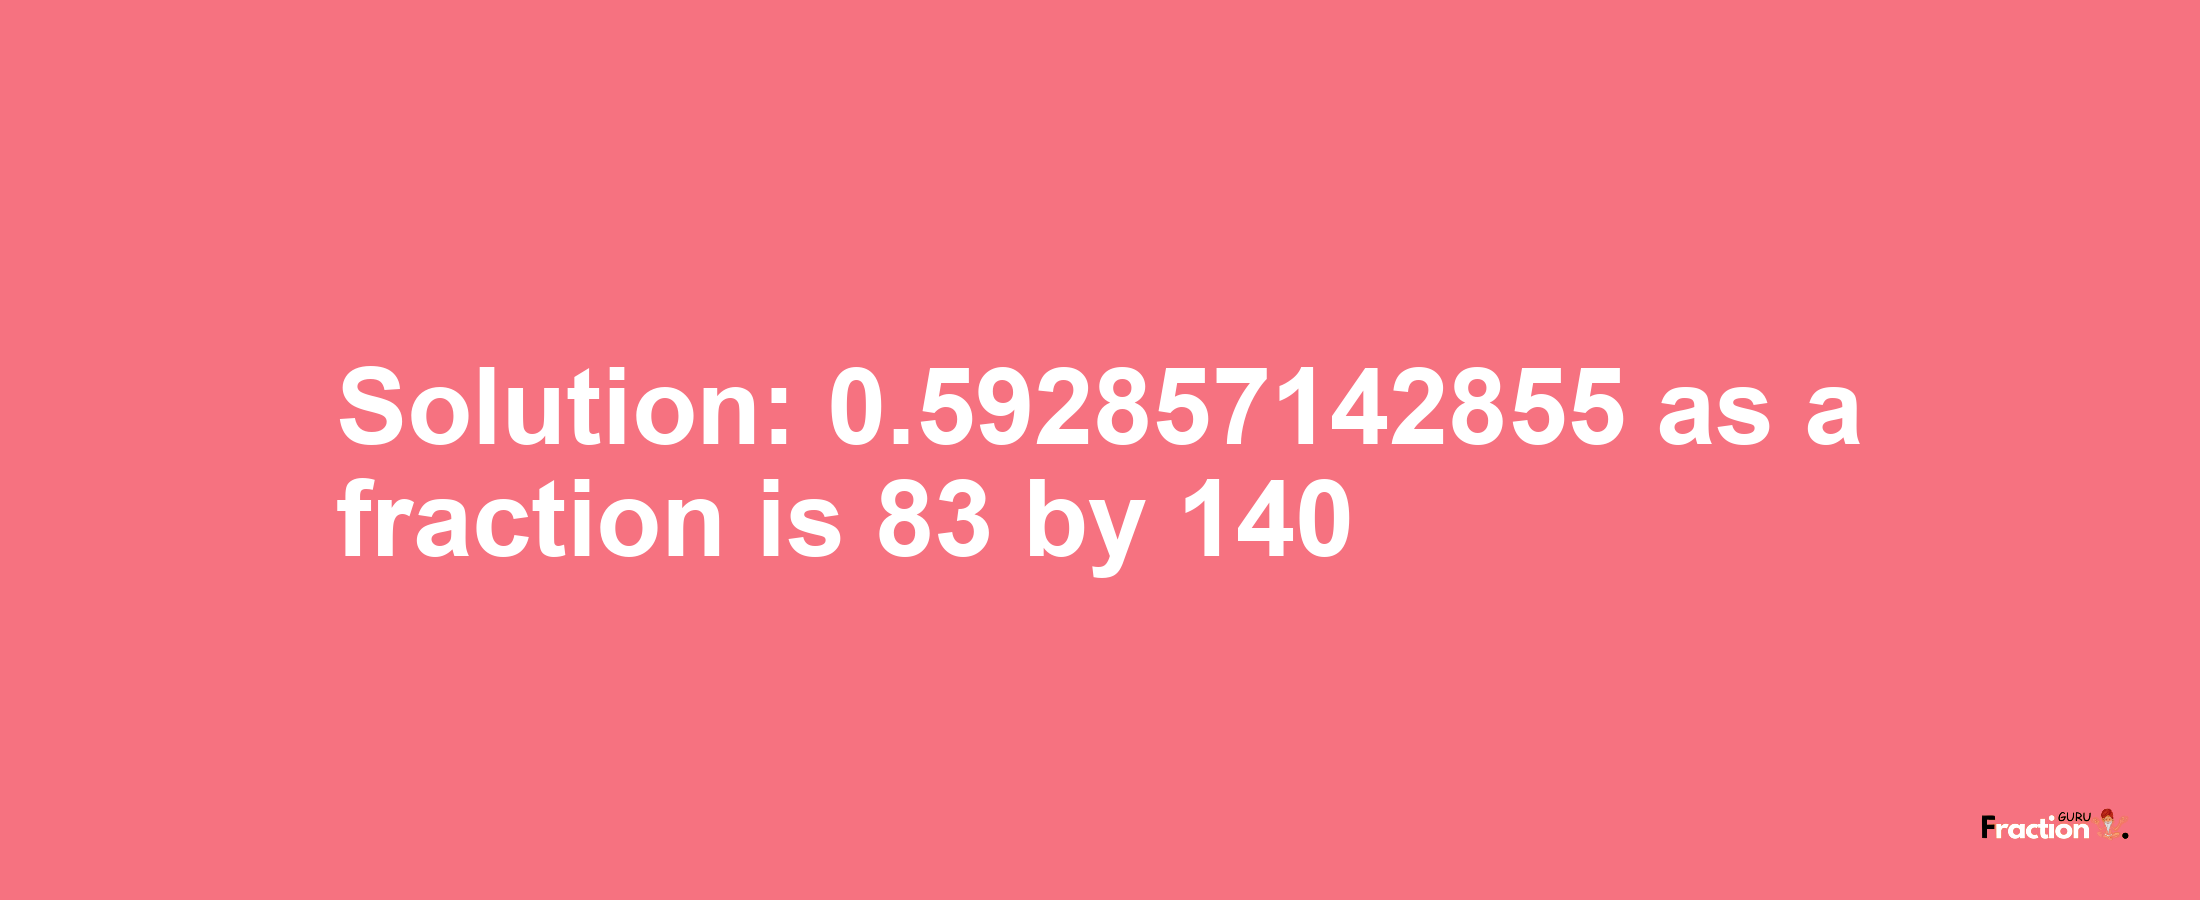 Solution:0.592857142855 as a fraction is 83/140